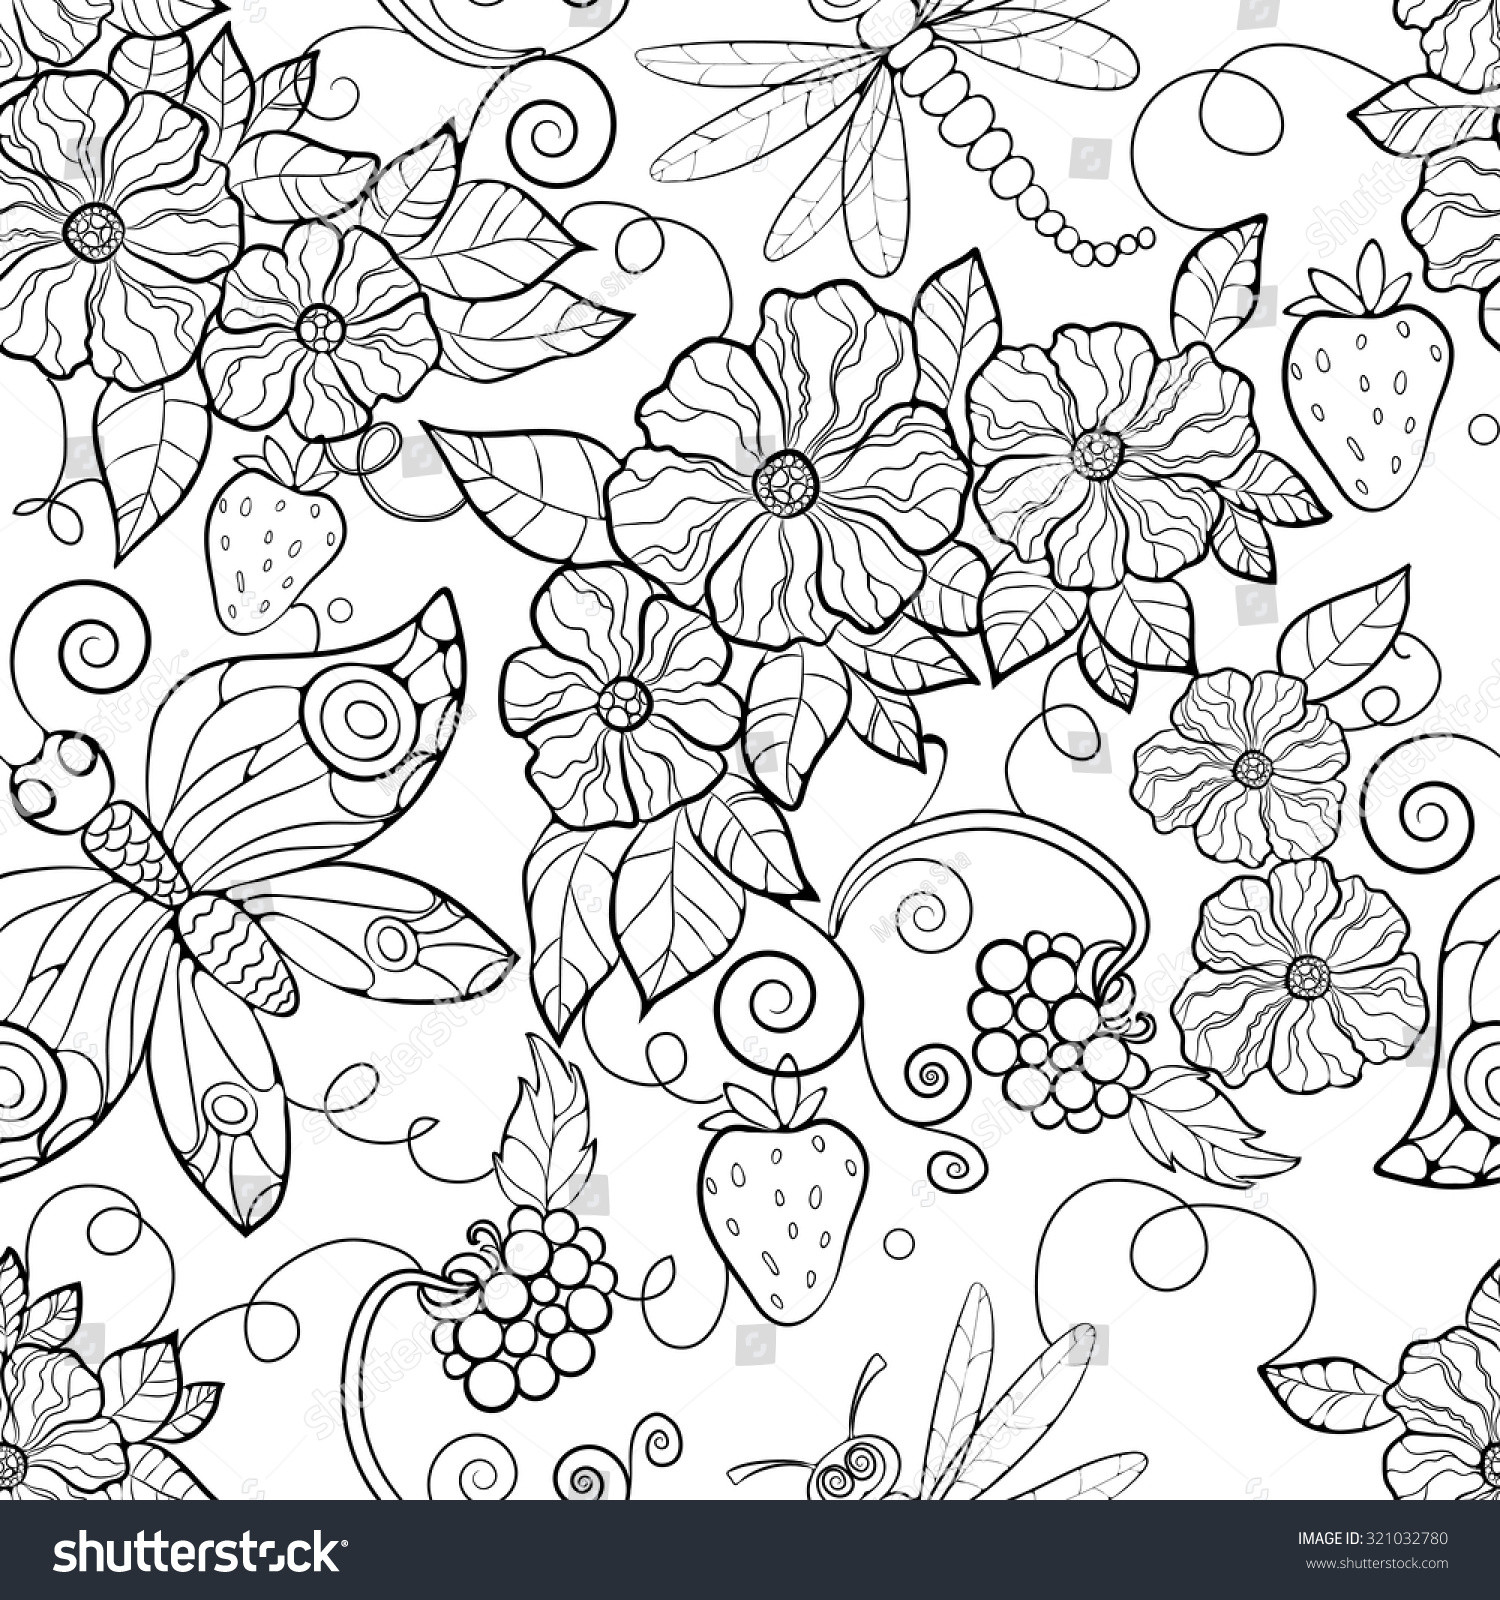 Adult Coloring Pages Patterns Flowers
 Butterfly Pattern Flowers Coloring Pages Adults Stock